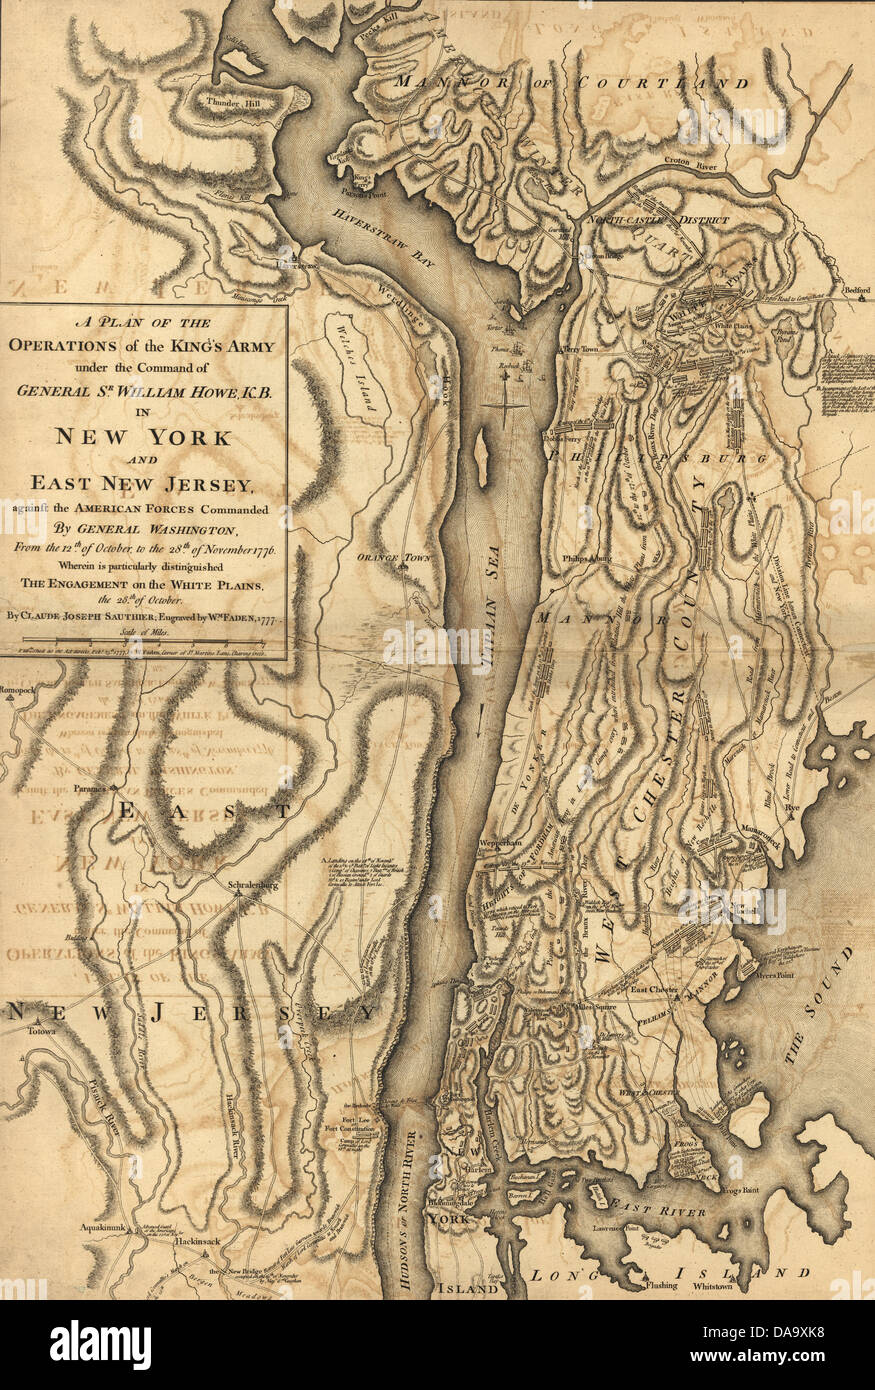 Map Of Howes Operations In New York And New Jersey 1776 From Atlas Of